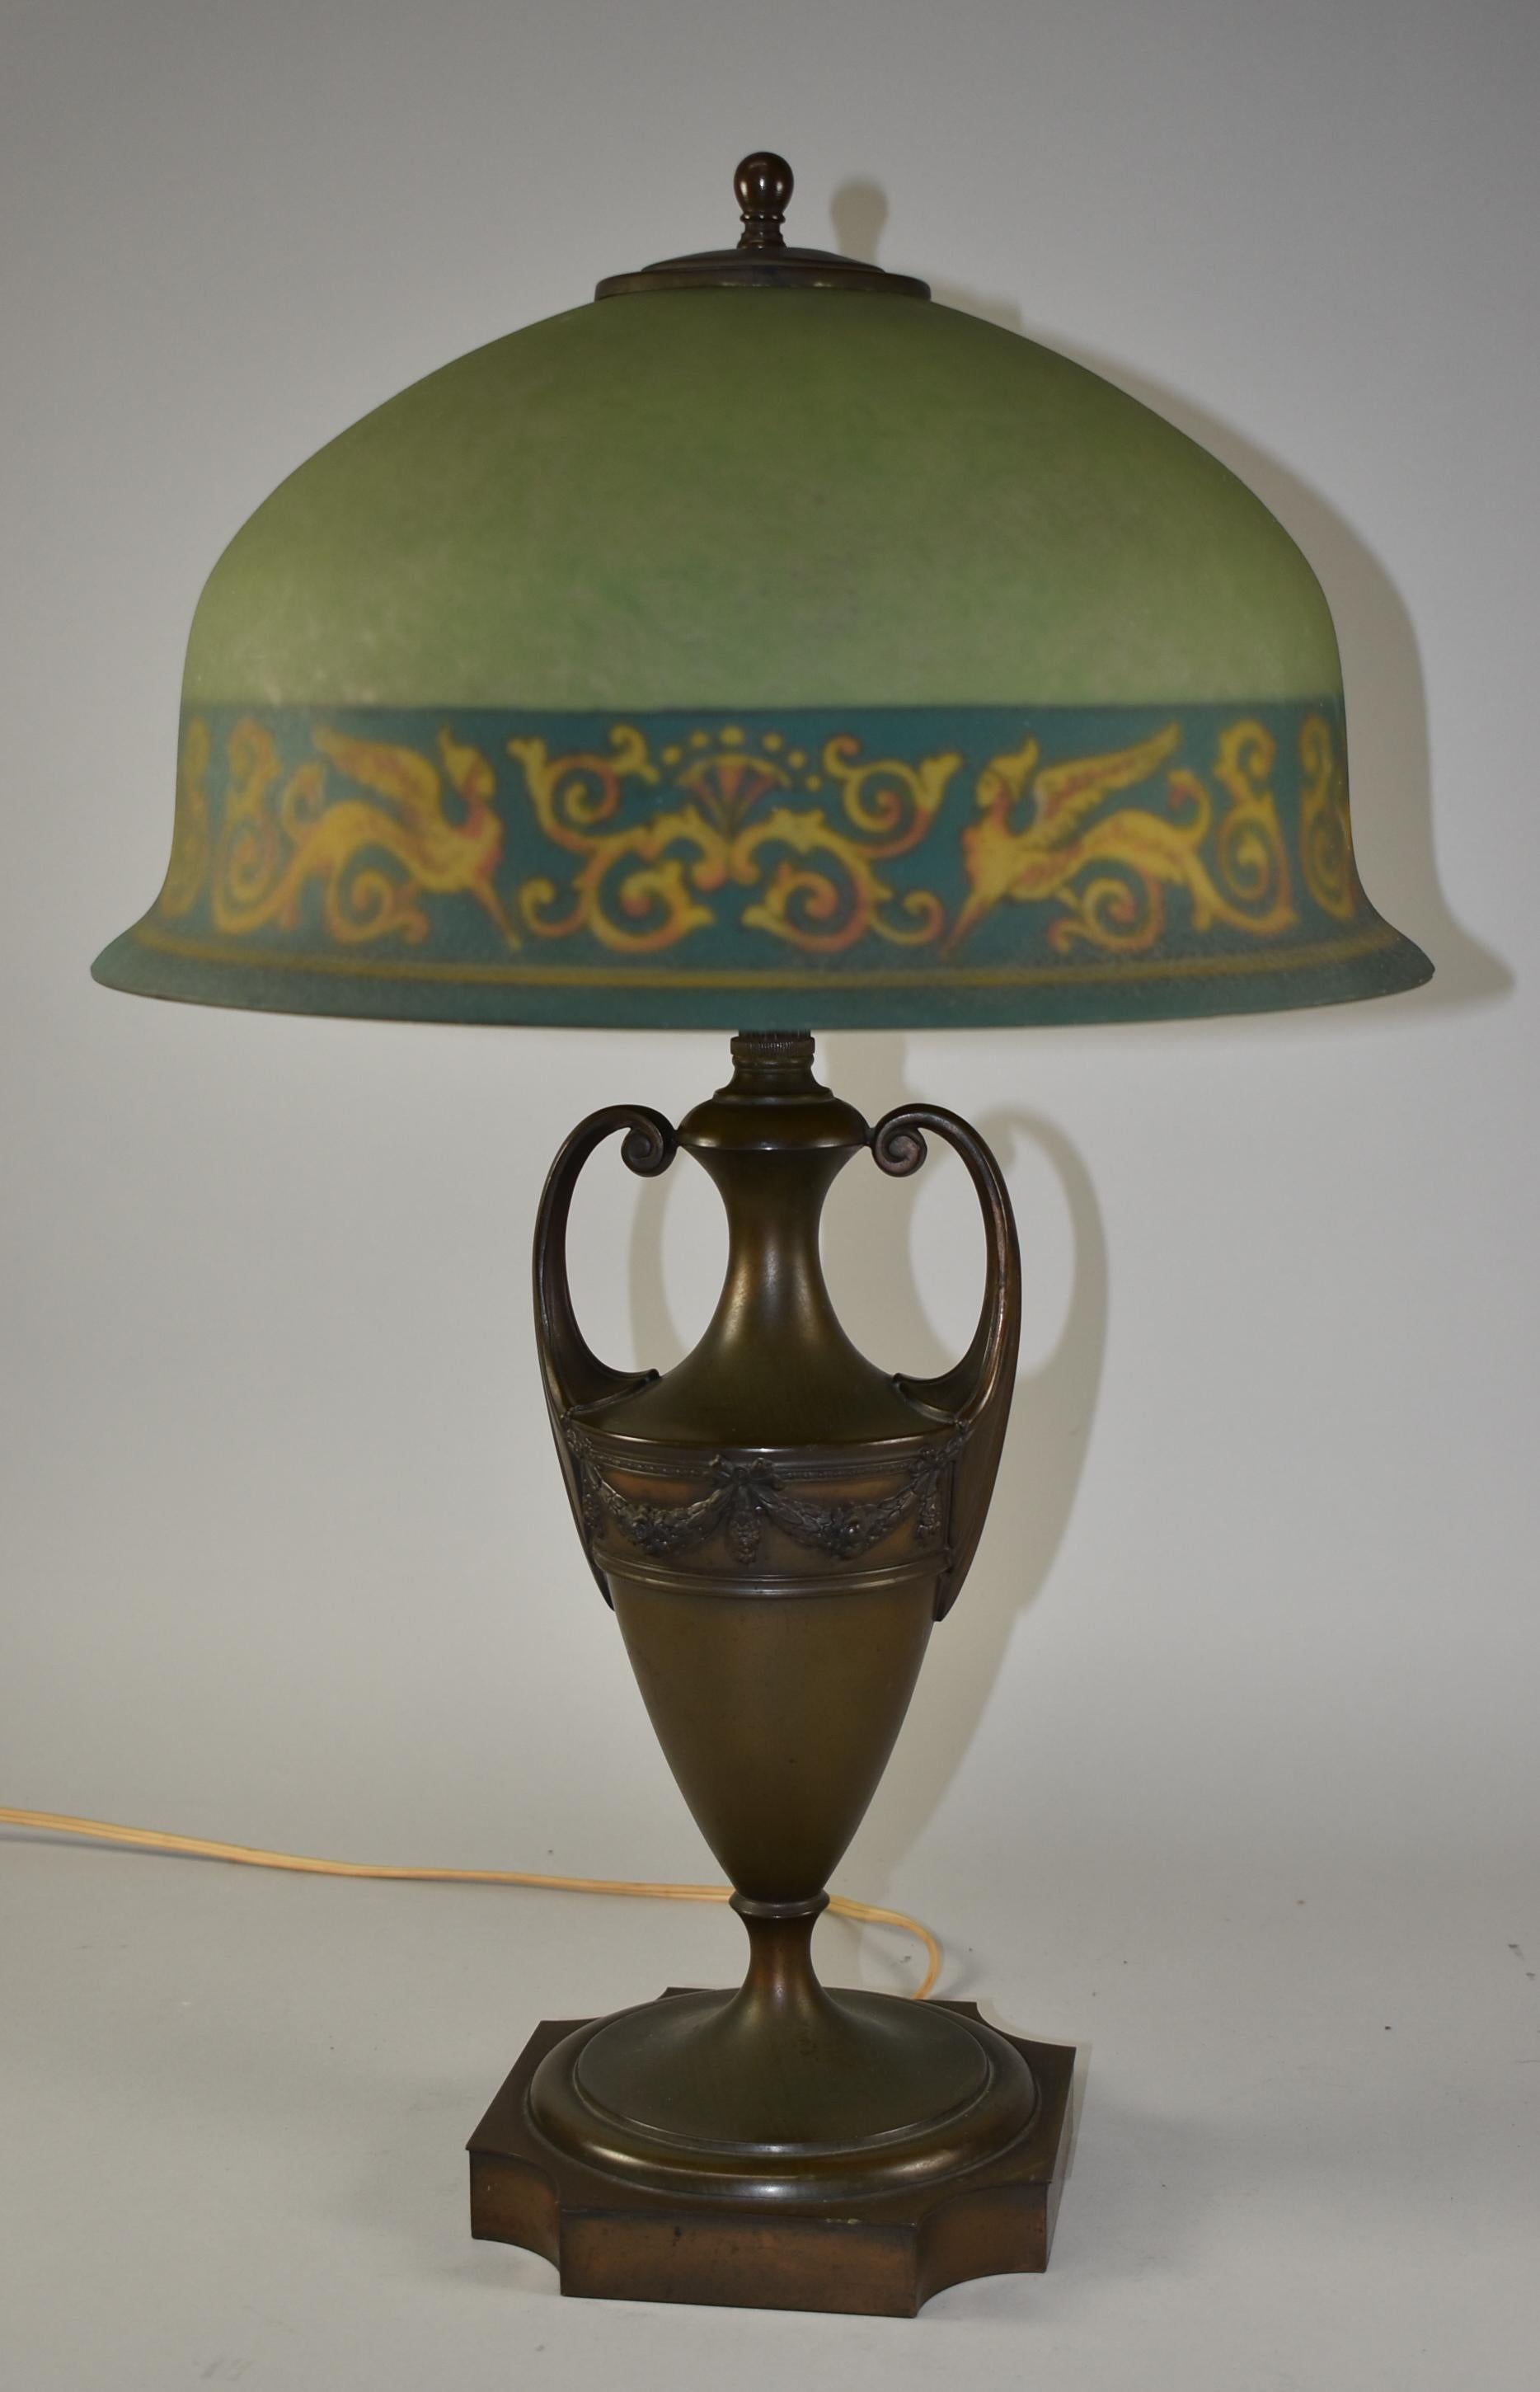 Pairpoint reverse painted table lamp. A beautifully hand decorated 14